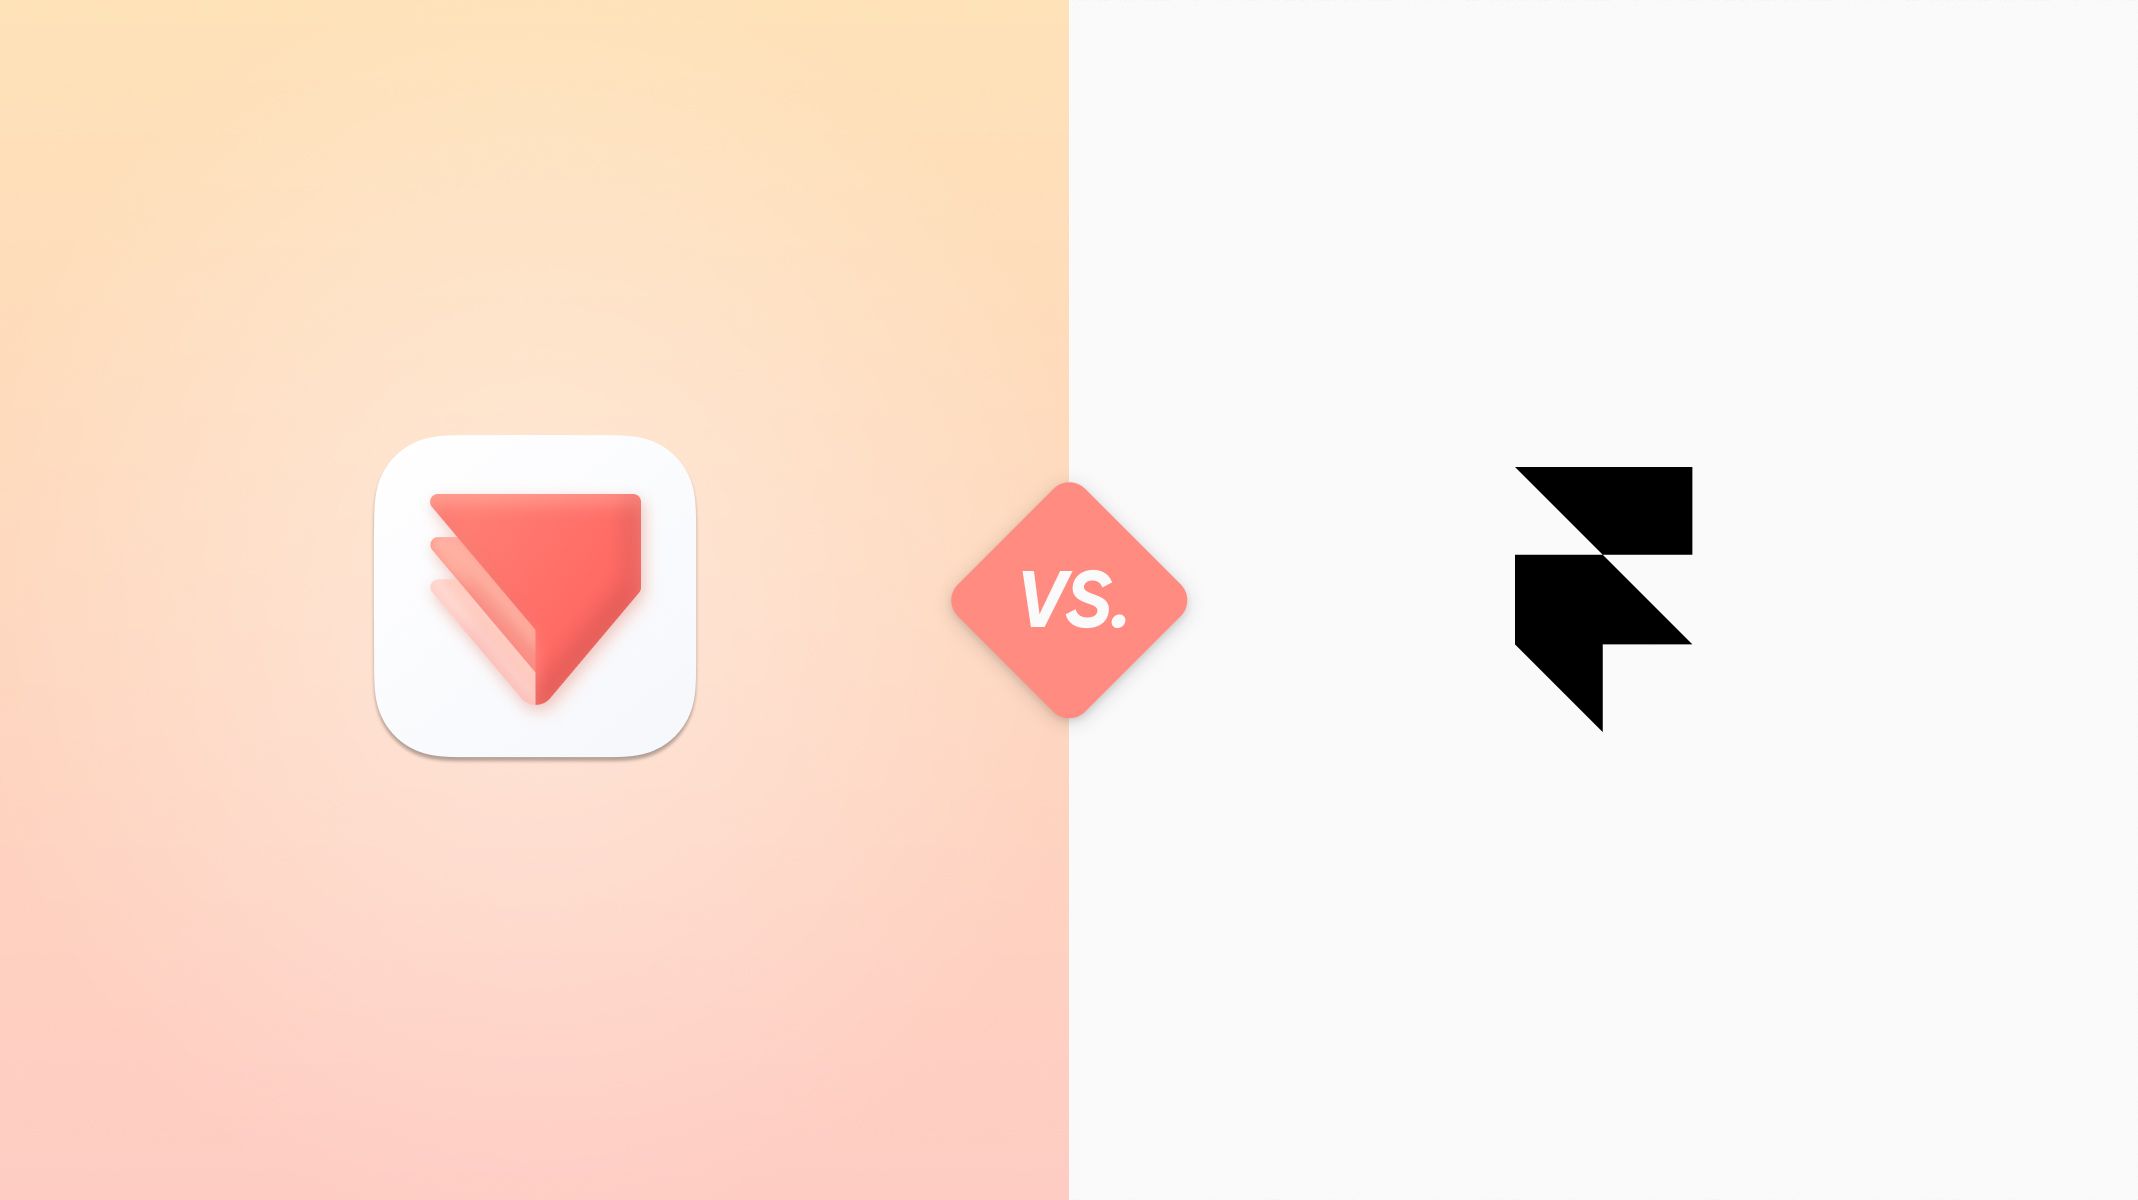 ProtoPie vs Framer, which one is right for you?